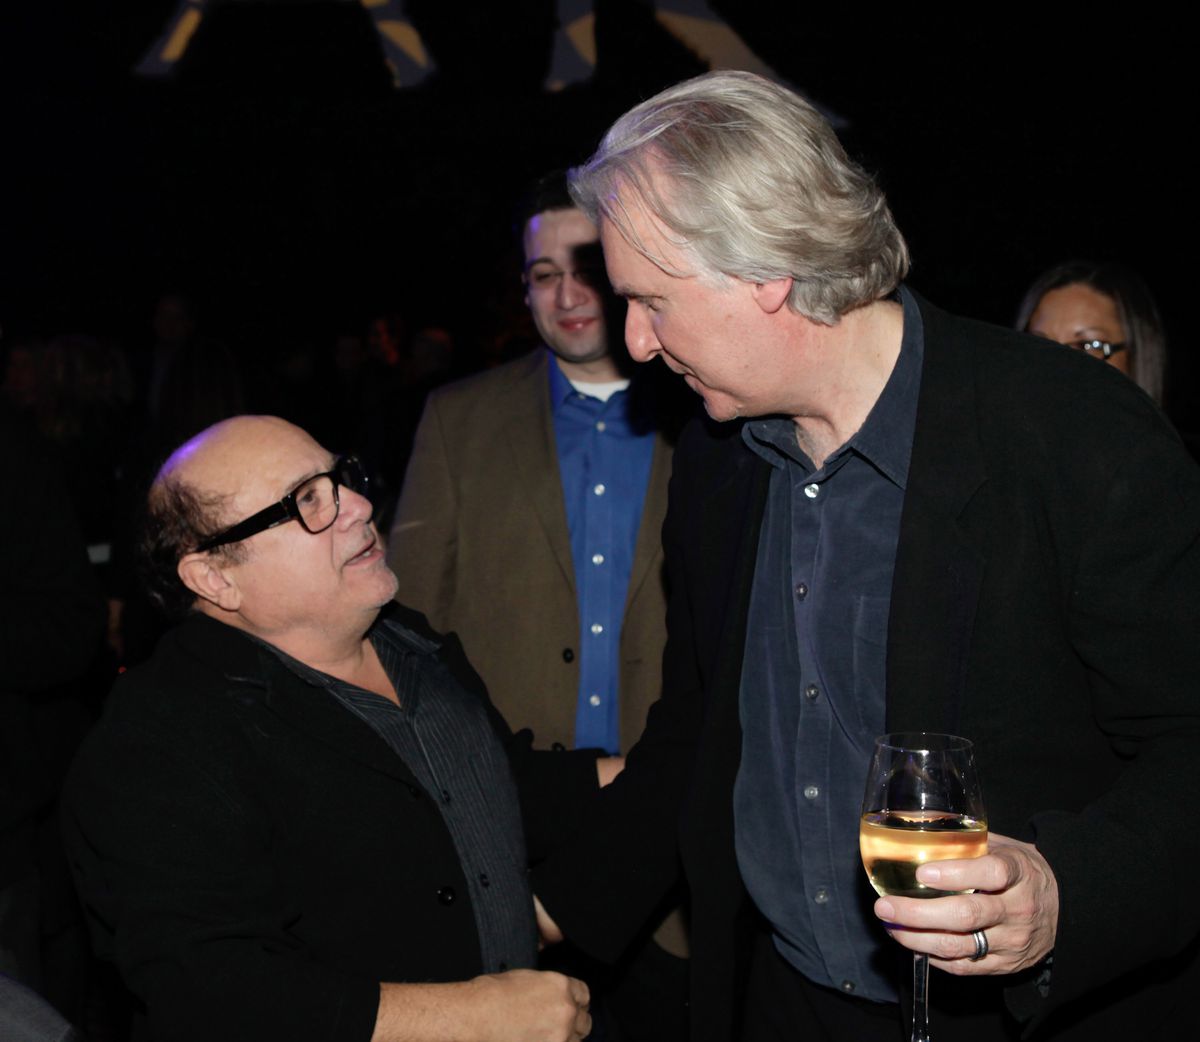 Danny Devito looks up to talk to director James Cameron, who is holding a glass of white wine at the Avatar after party.